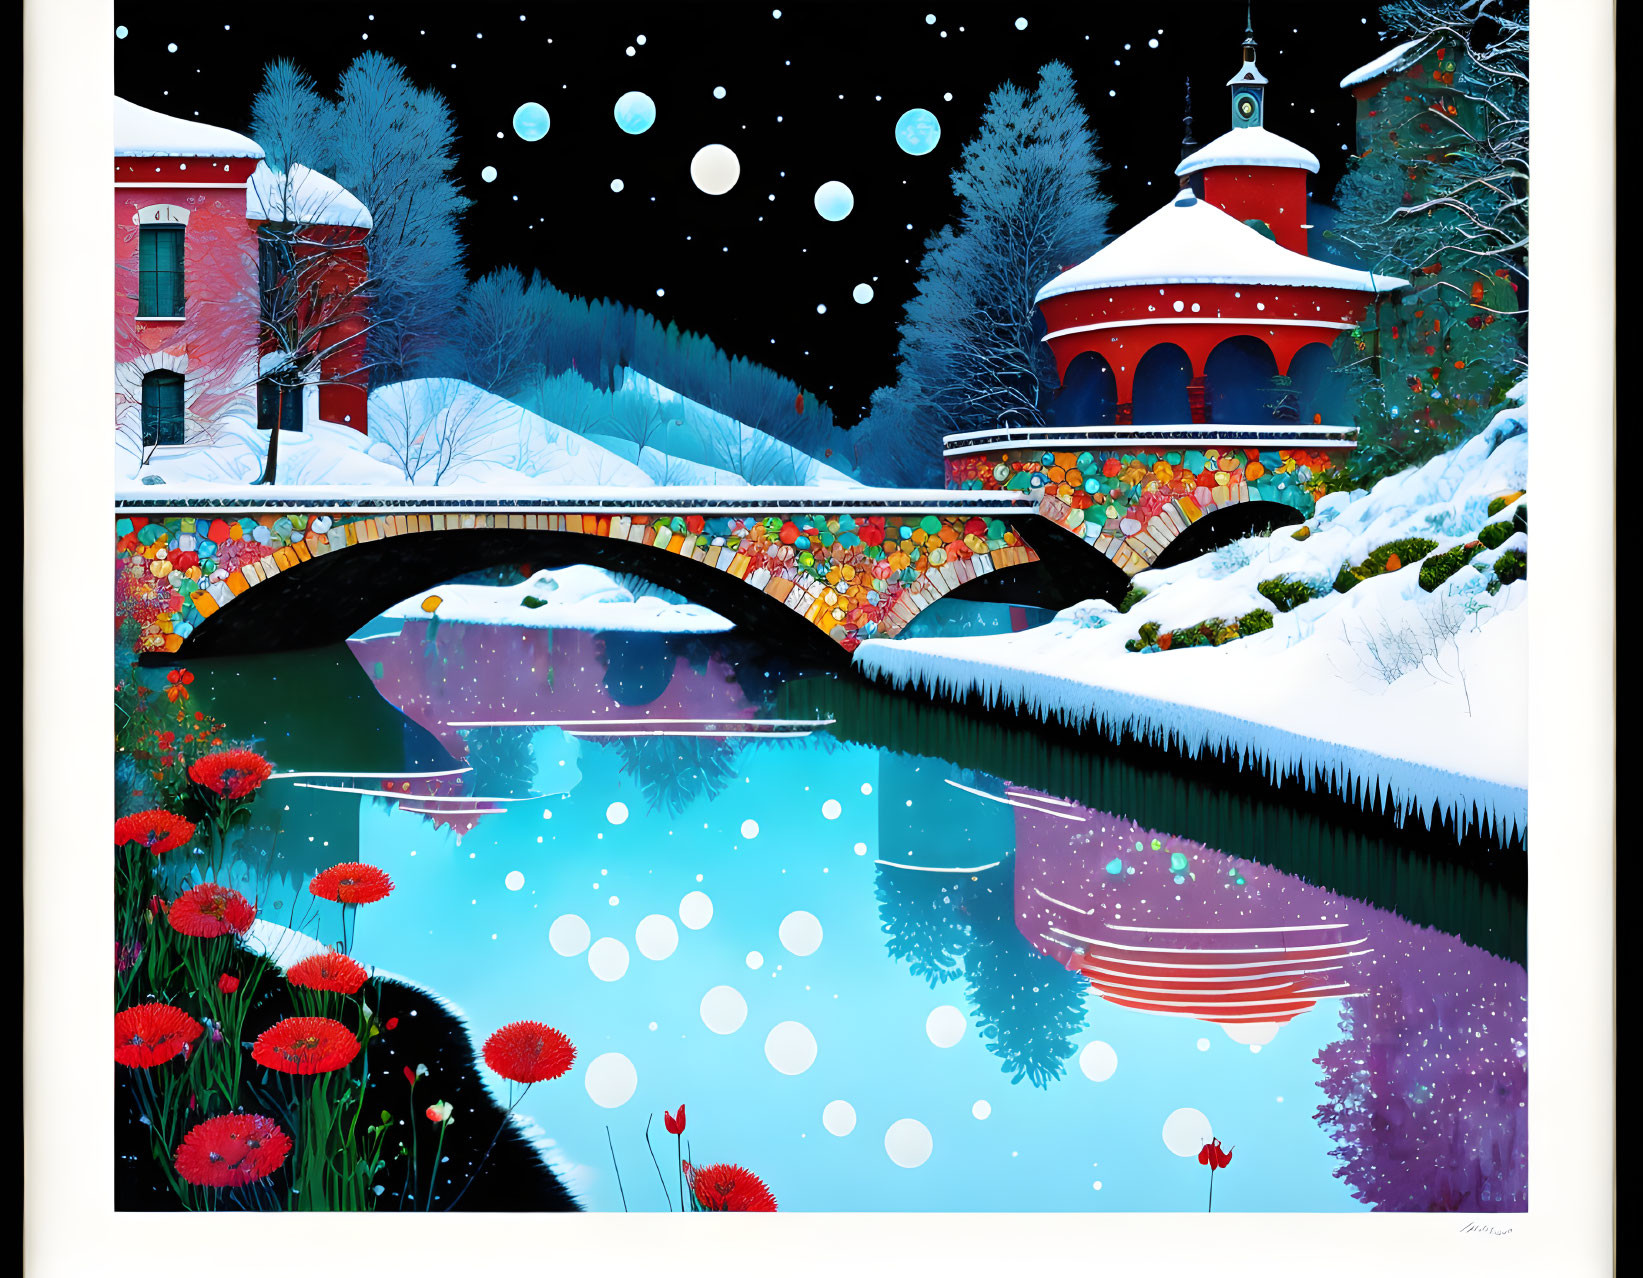 Winter scene with stone bridge, red flowers, colorful buildings, and night sky.